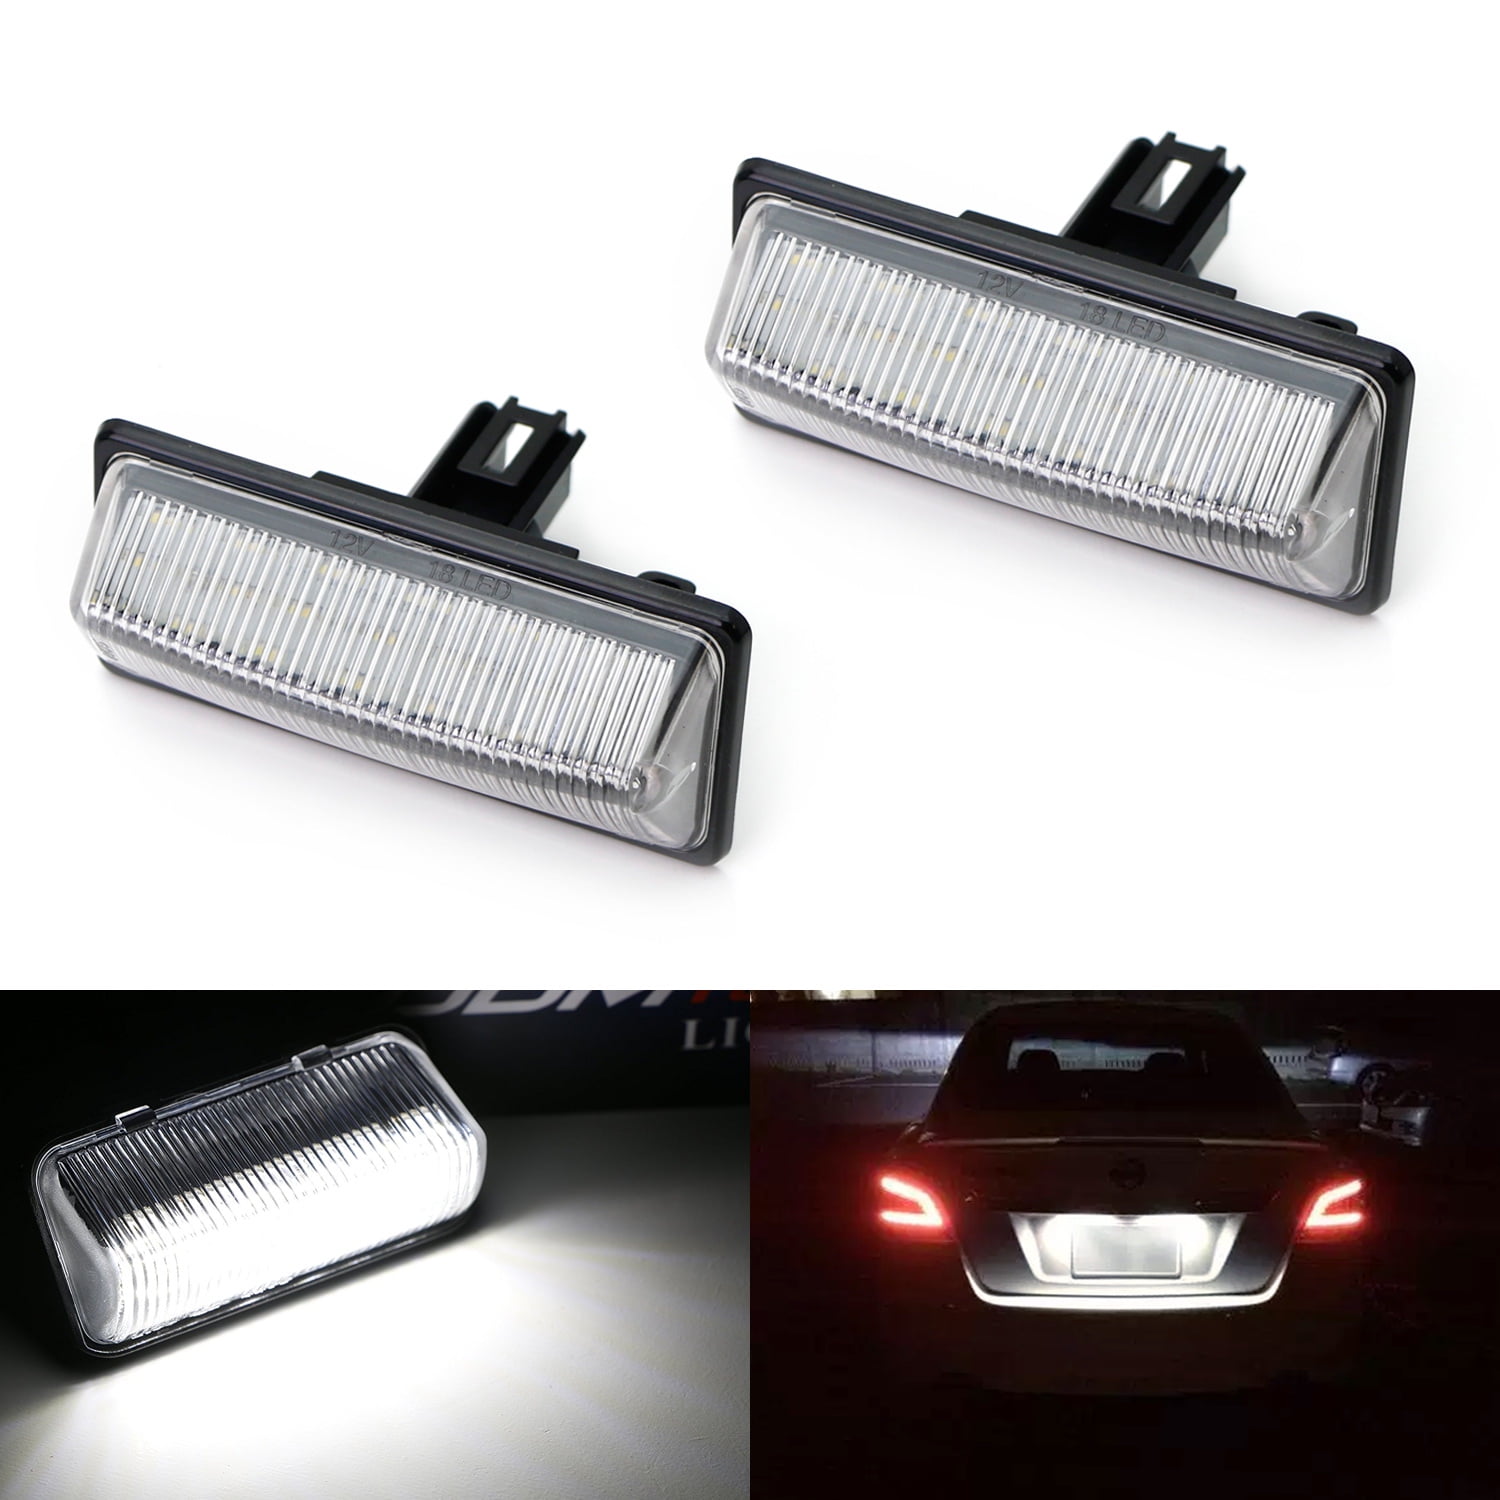 iJDMTOY (2) Xenon White OEM-Replace 18-SMD 3W LED License Plate Lights Assembly For Nissan 2011 Infiniti Qx56 License Plate Bulb Replacement